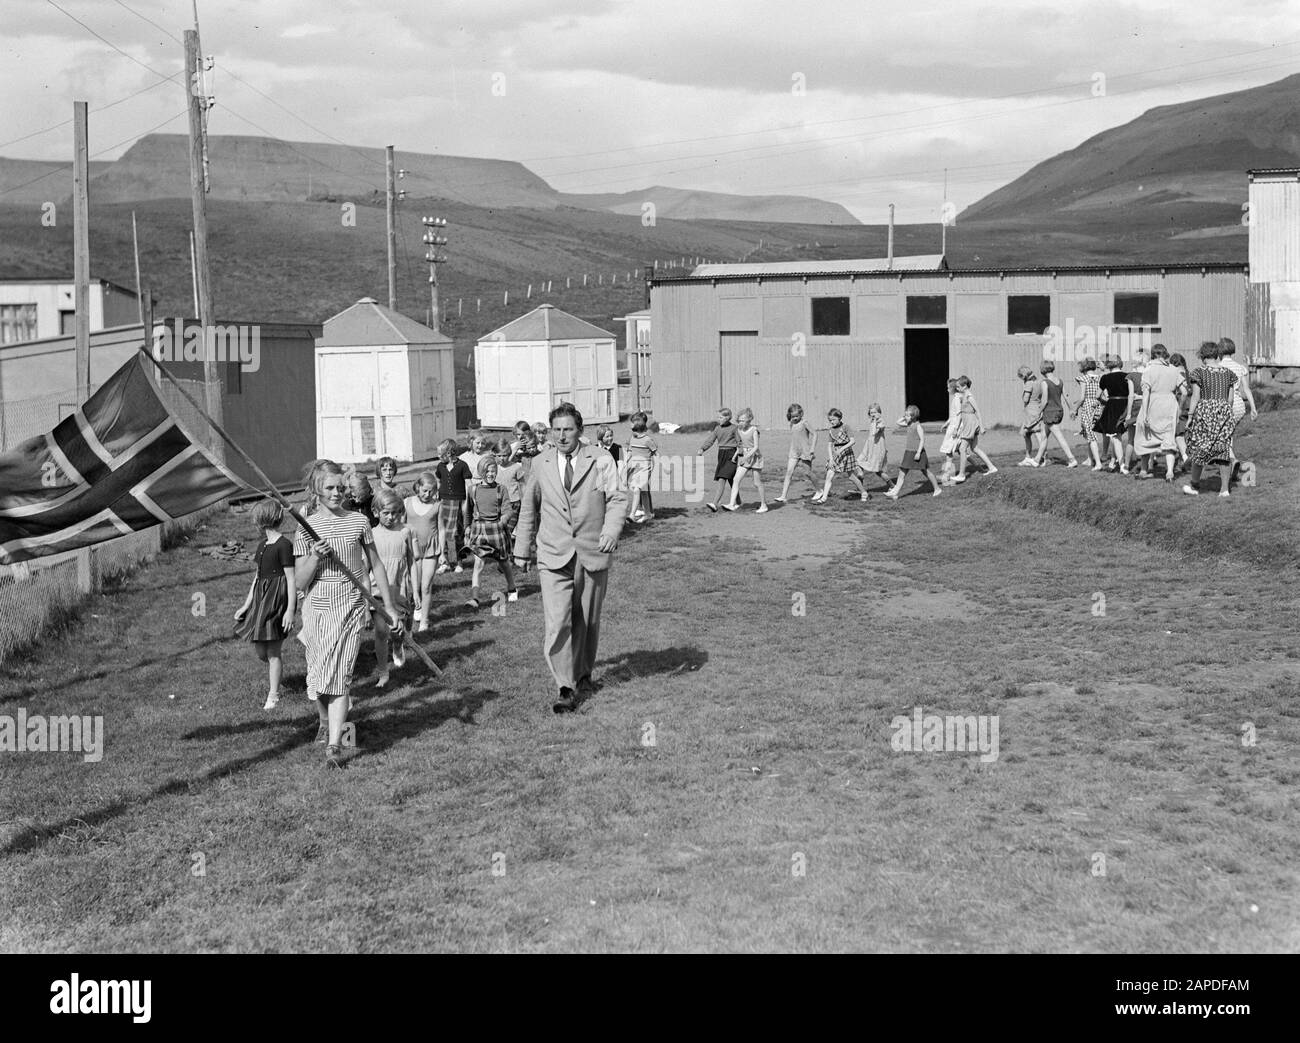 Iceland Description: Alafoss. Row young girls with the Icelandic flag in front, marching across the terrain, accompanied by businessman Sigurjón Pétursson Date: 1934 Location: Iceland, Àlafoss Keywords: children, marching, entrepreneurs, flags Personal name: Pétursson, Sigurjón Stock Photo